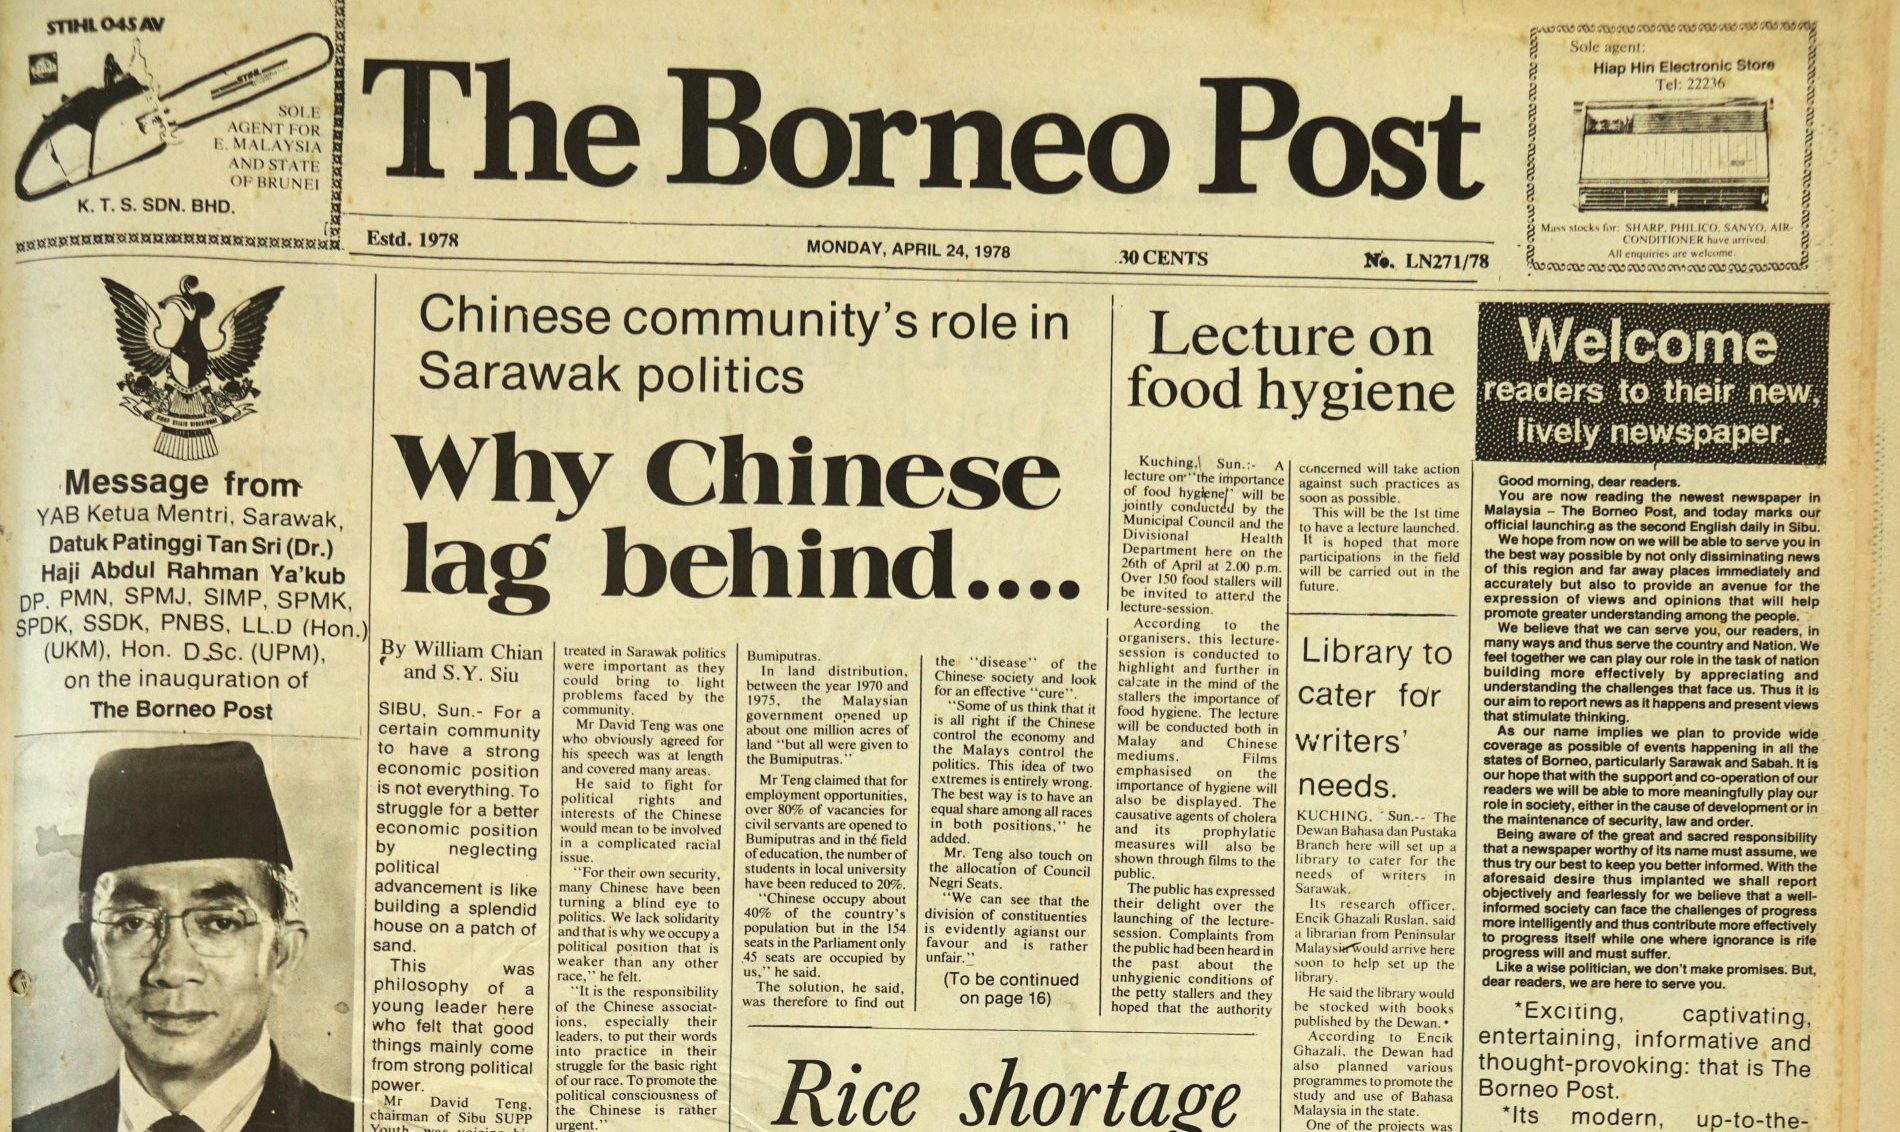 The Borneo Post turns 45 years old today!